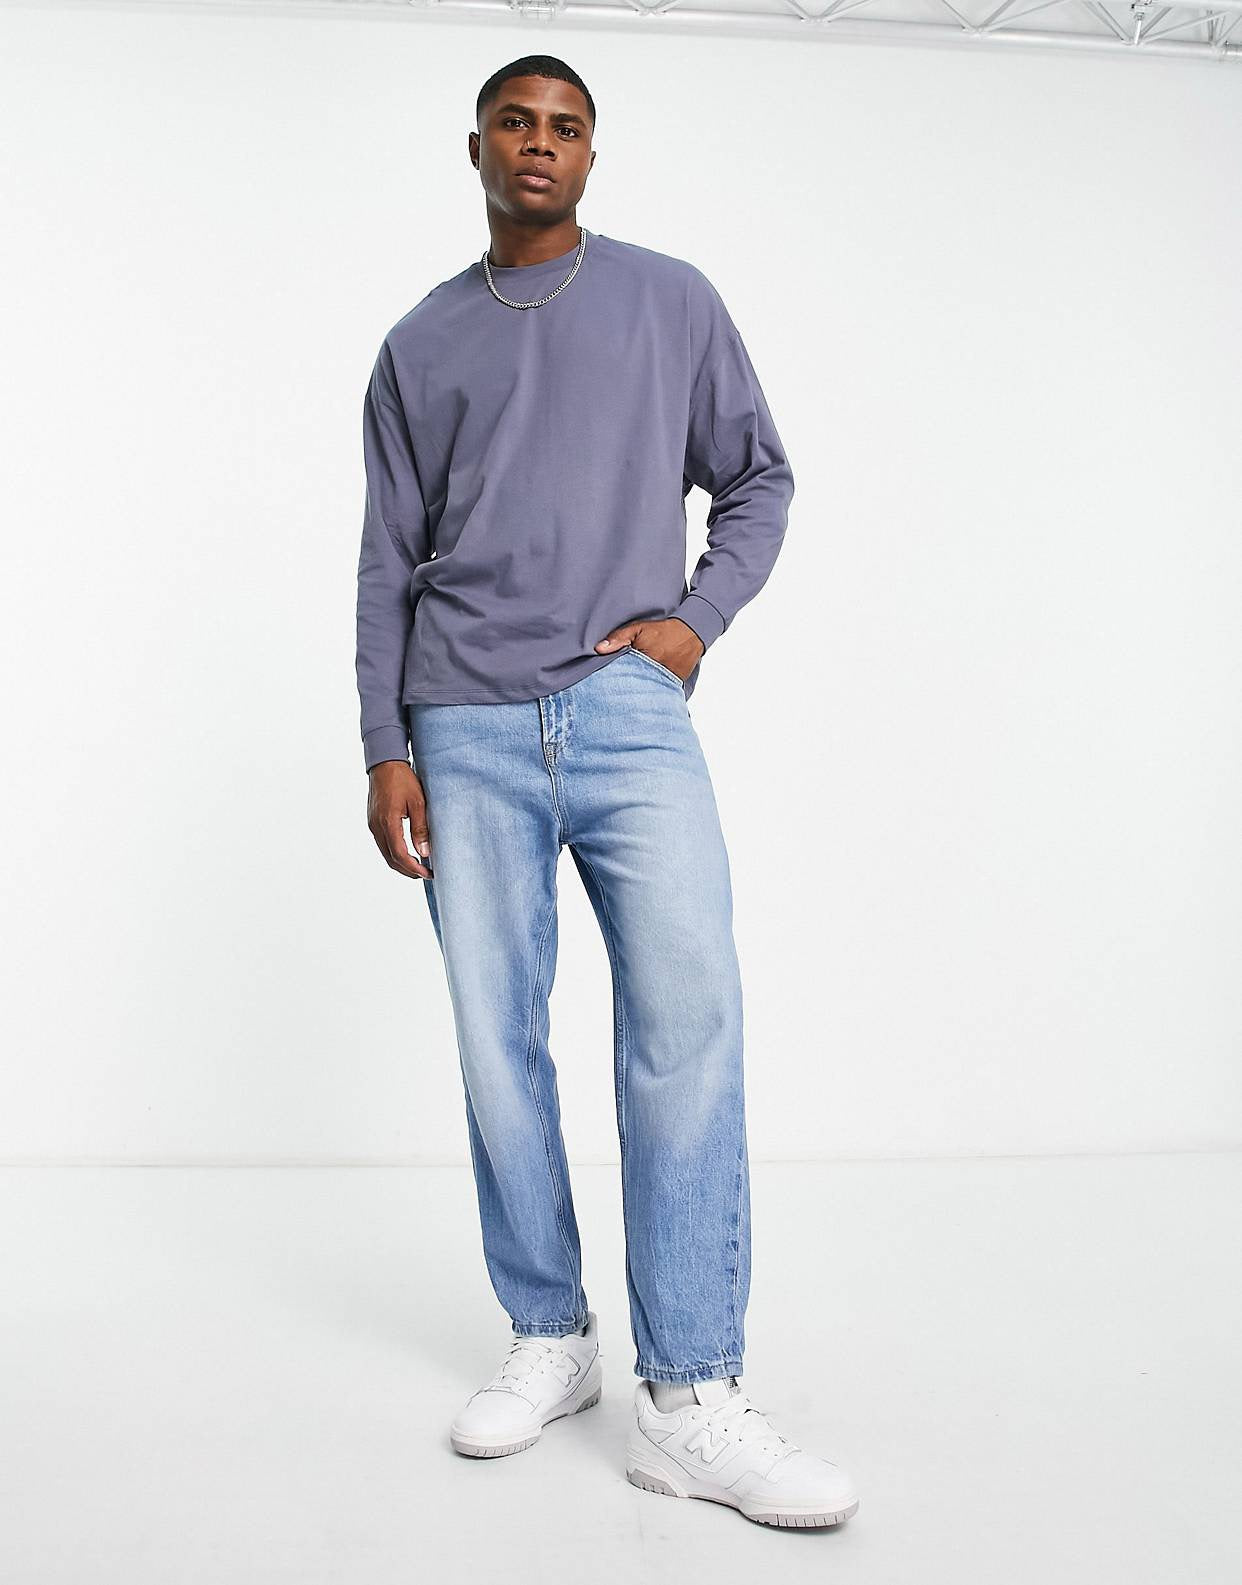 ASOS DESIGN oversized long sleeve t-shirt in blue with New York city back print